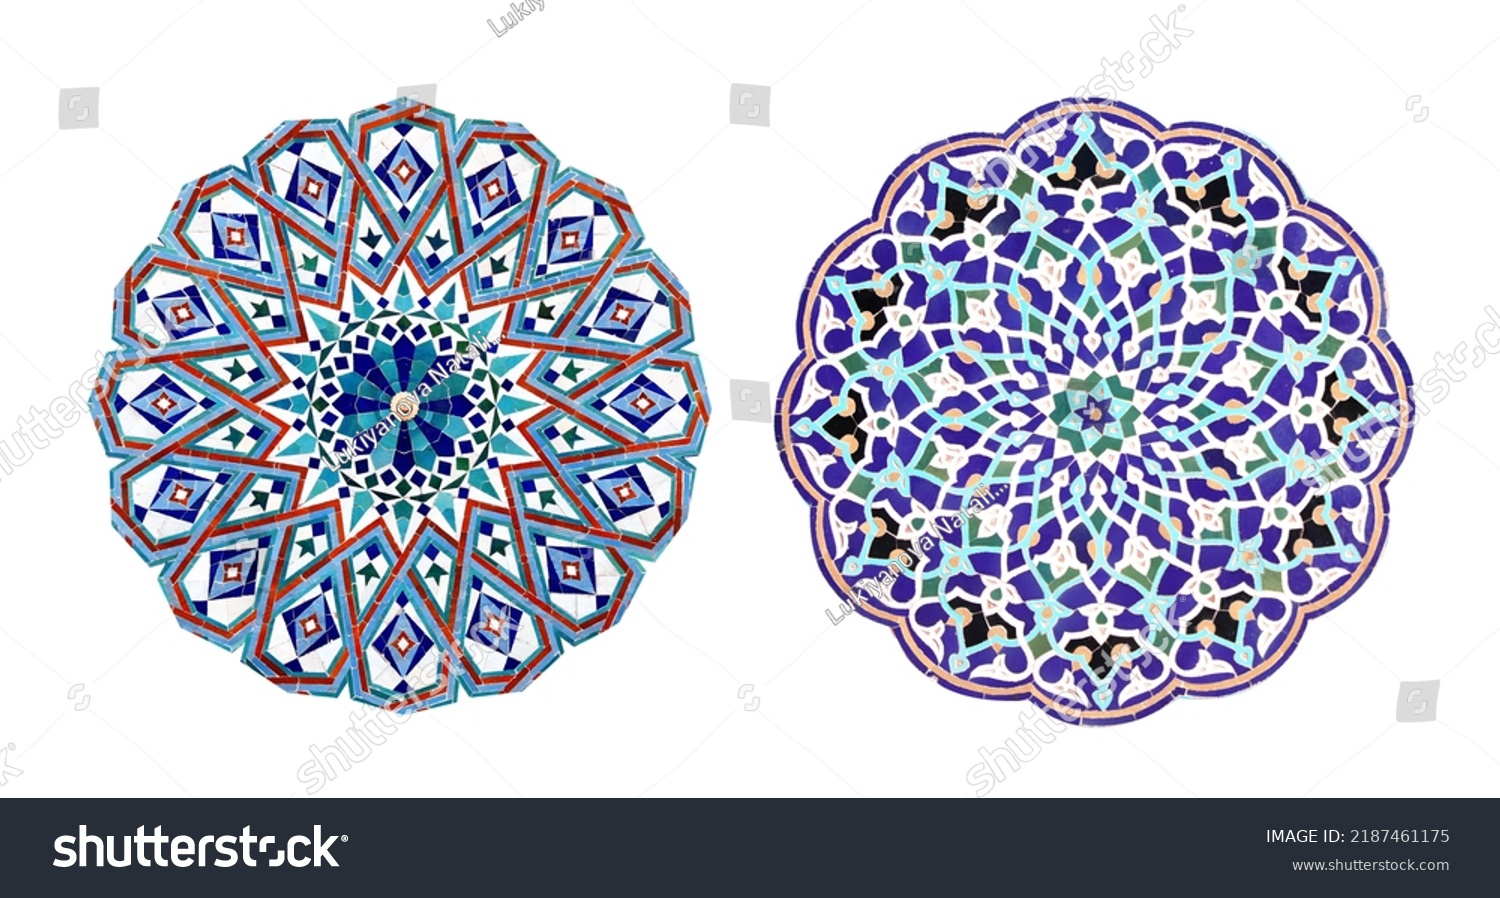 Set of round detail of ancient mosaic walls with floral and geometric ornaments. Collection of ceramic circles with traditional iranian tile decorations. Isolated on white background #2187461175